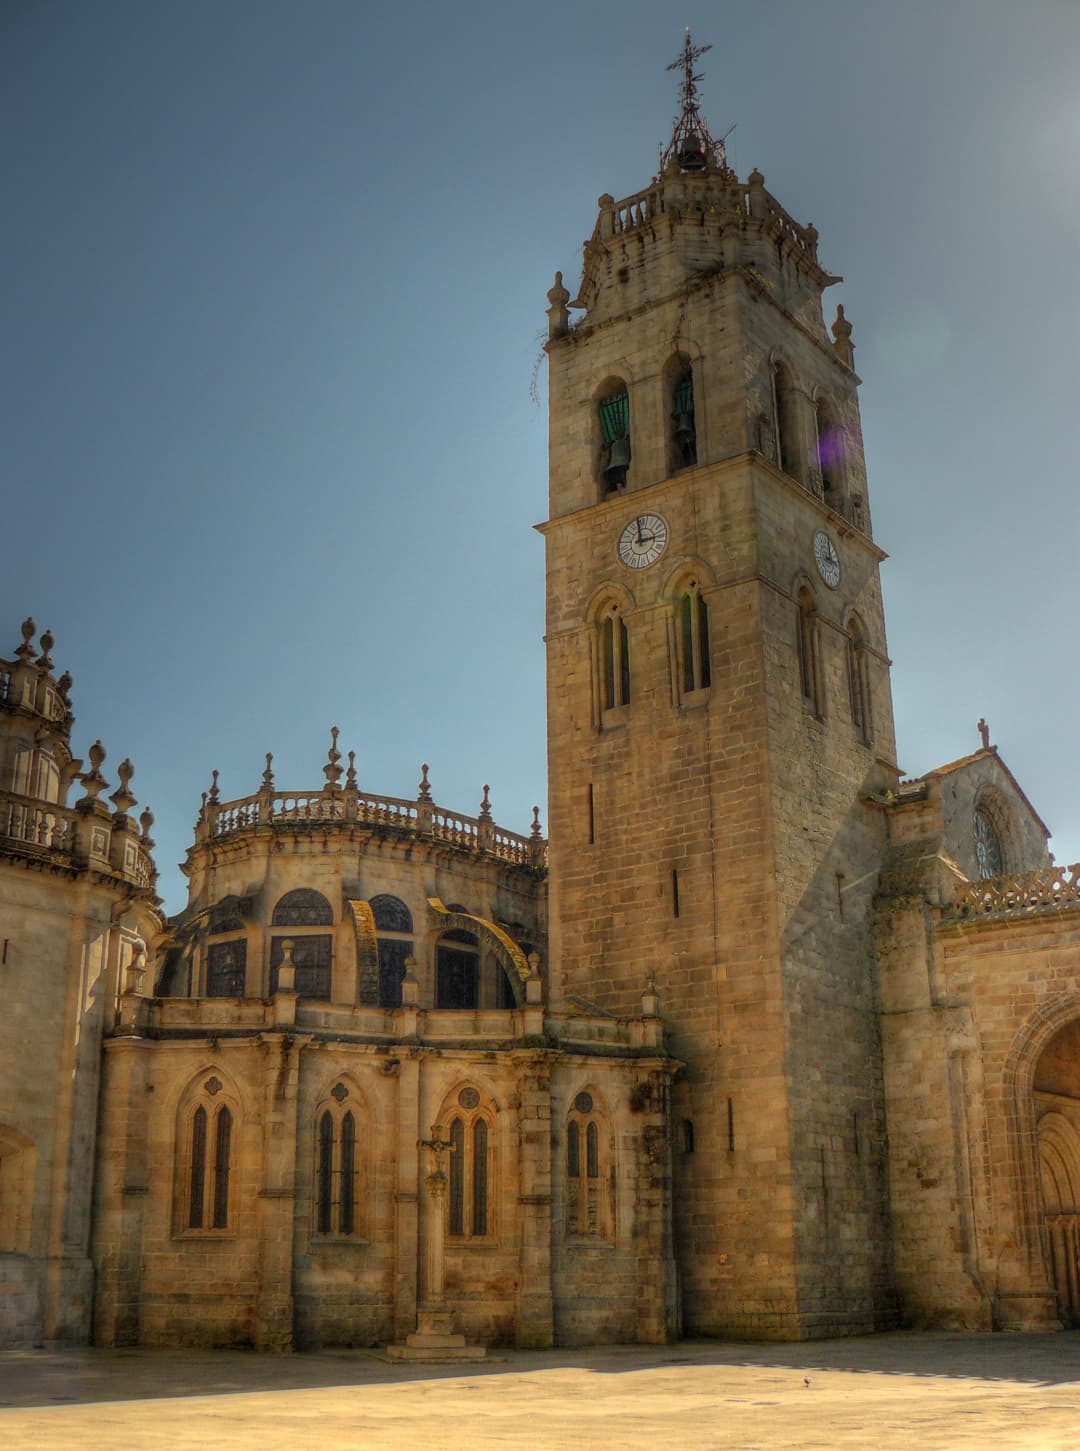 The Cathedral of Lugo